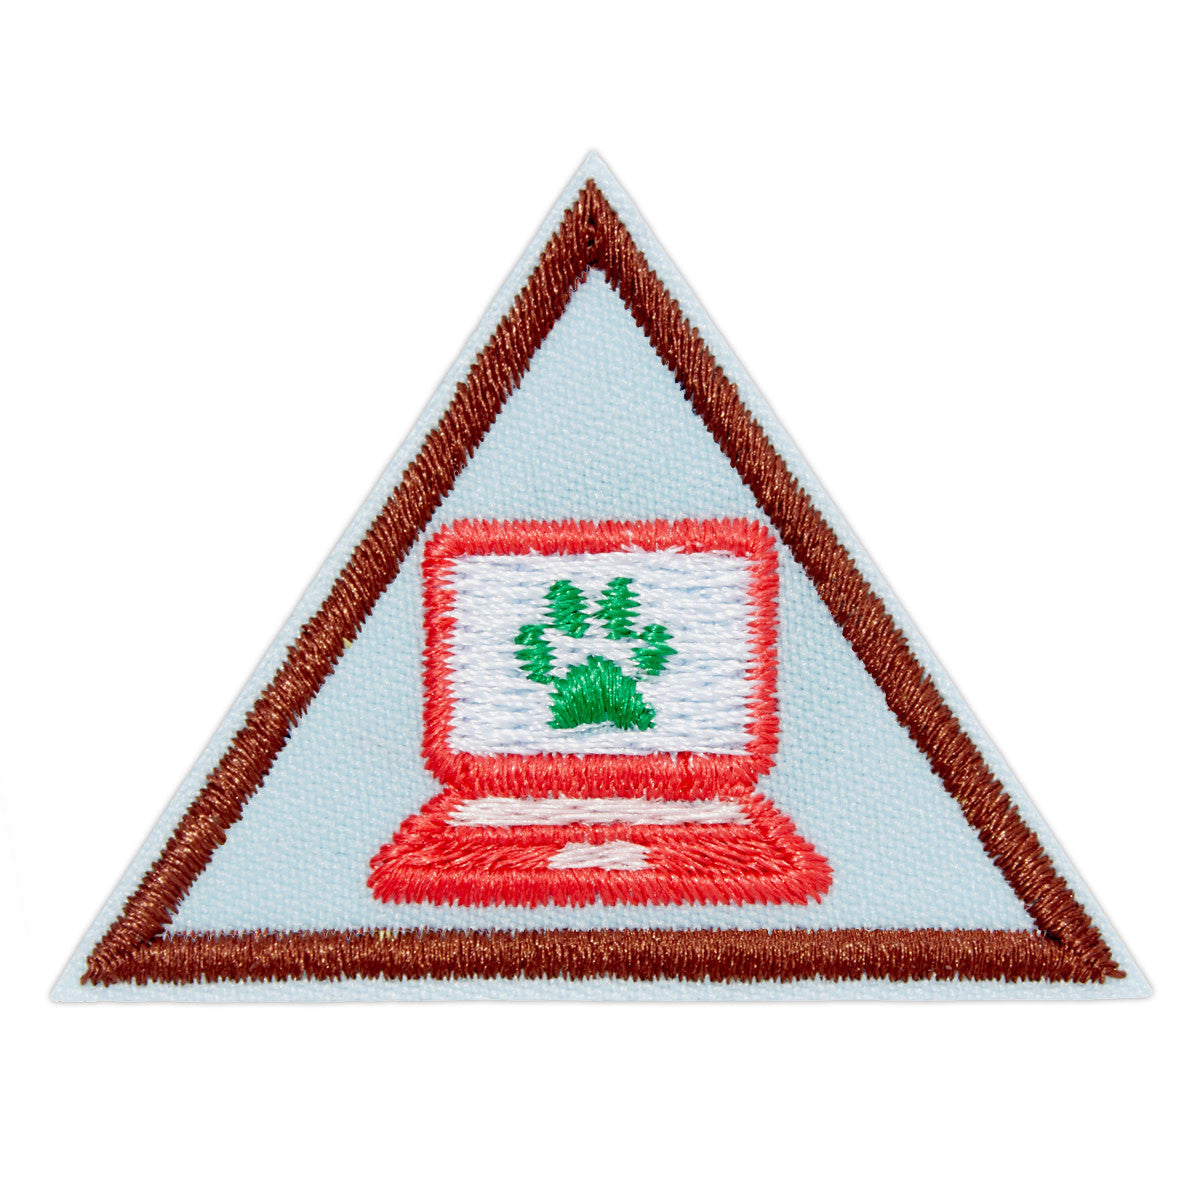 Girl Scouts Brownie Cybersecurity Safeguards Badge - Basics Clothing Store